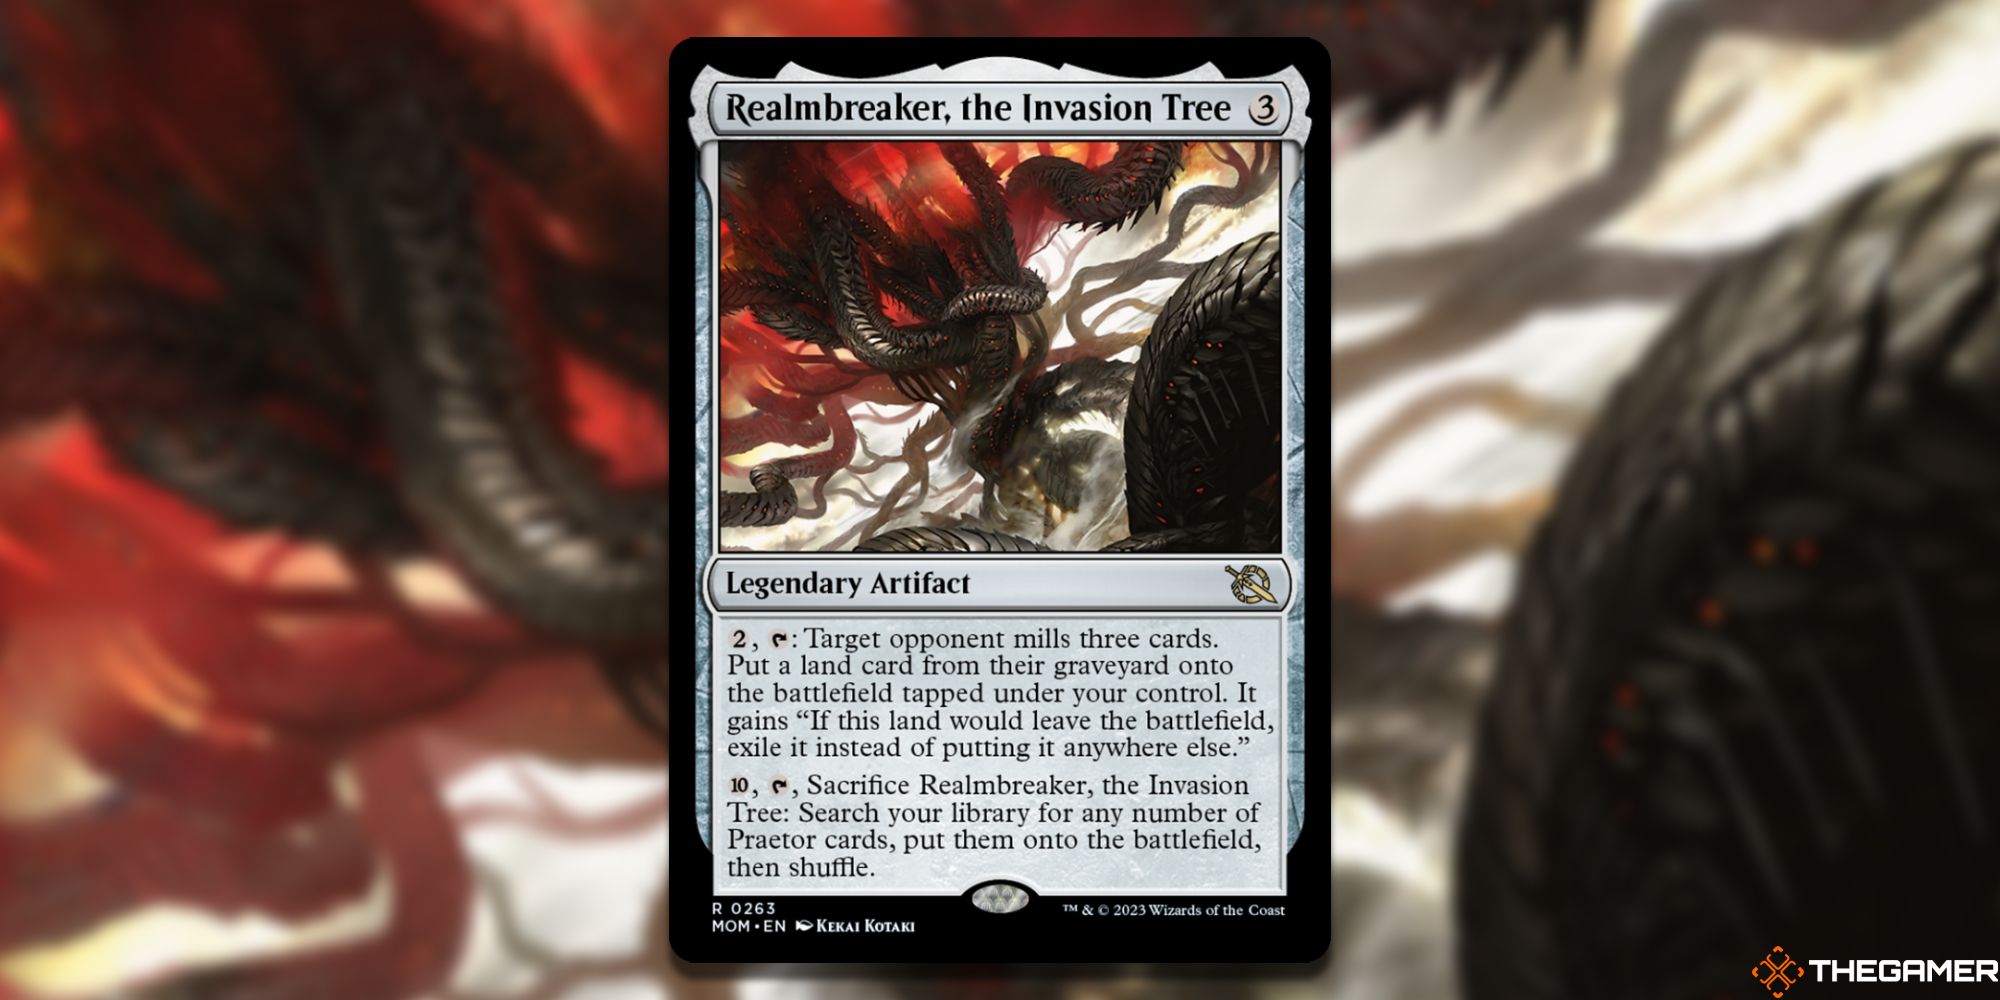 Realmbreaker The Invasion Tree card image from Magic: The Gathering, featuring art by Kekai Kotaki